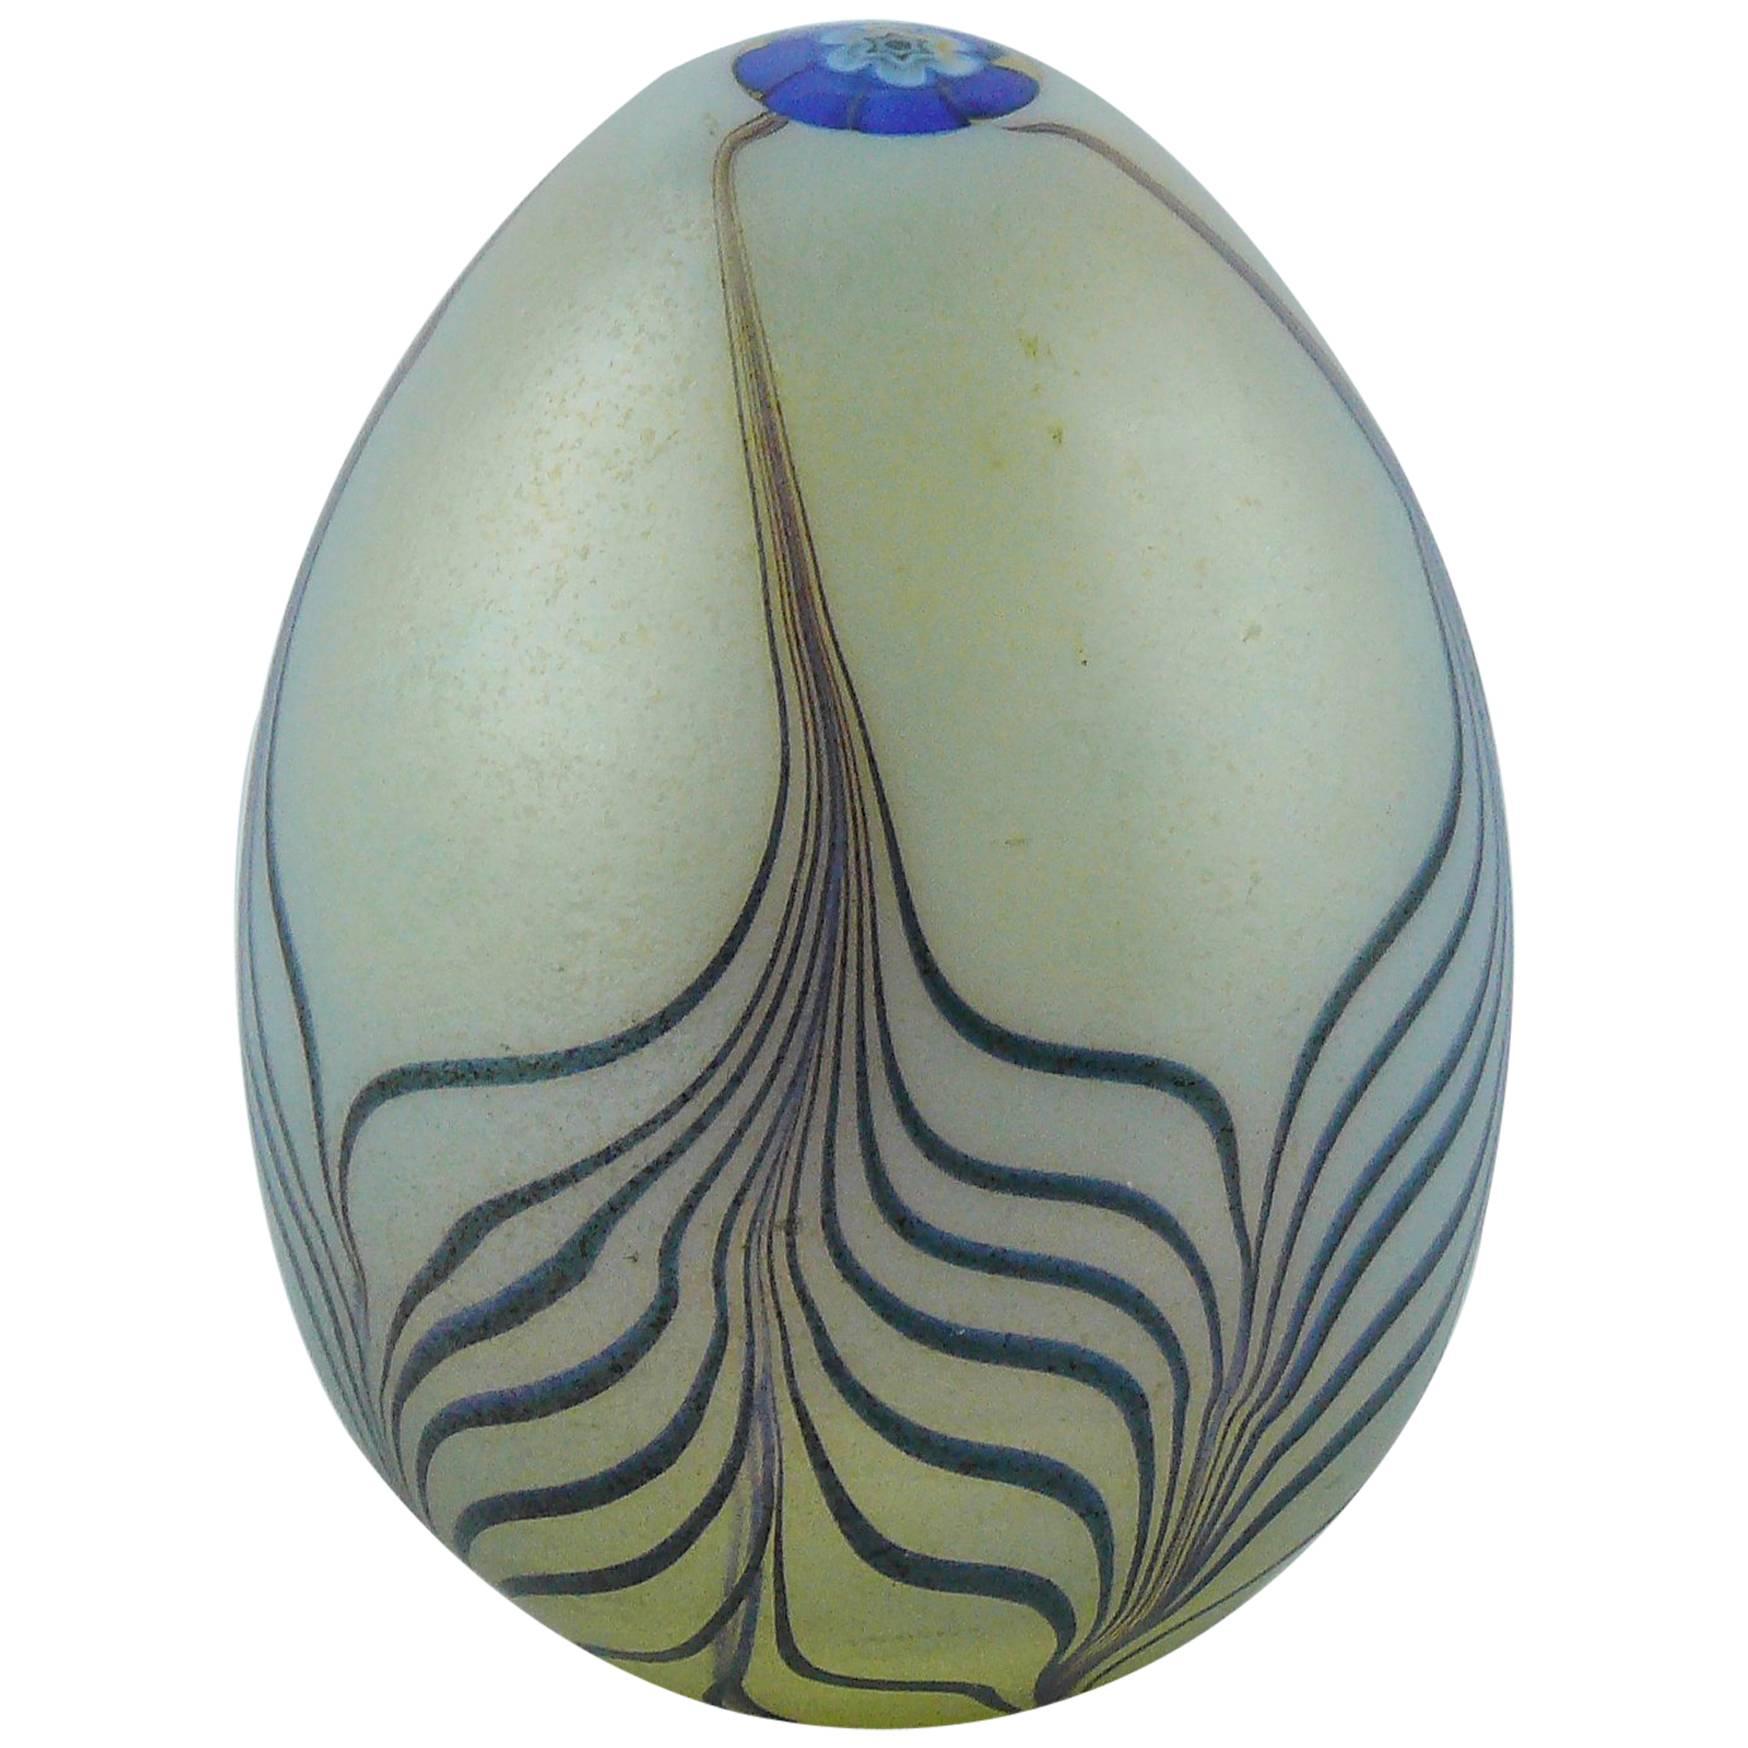 Christian Dior Vintage Murano Art Glass Egg Paperweight 